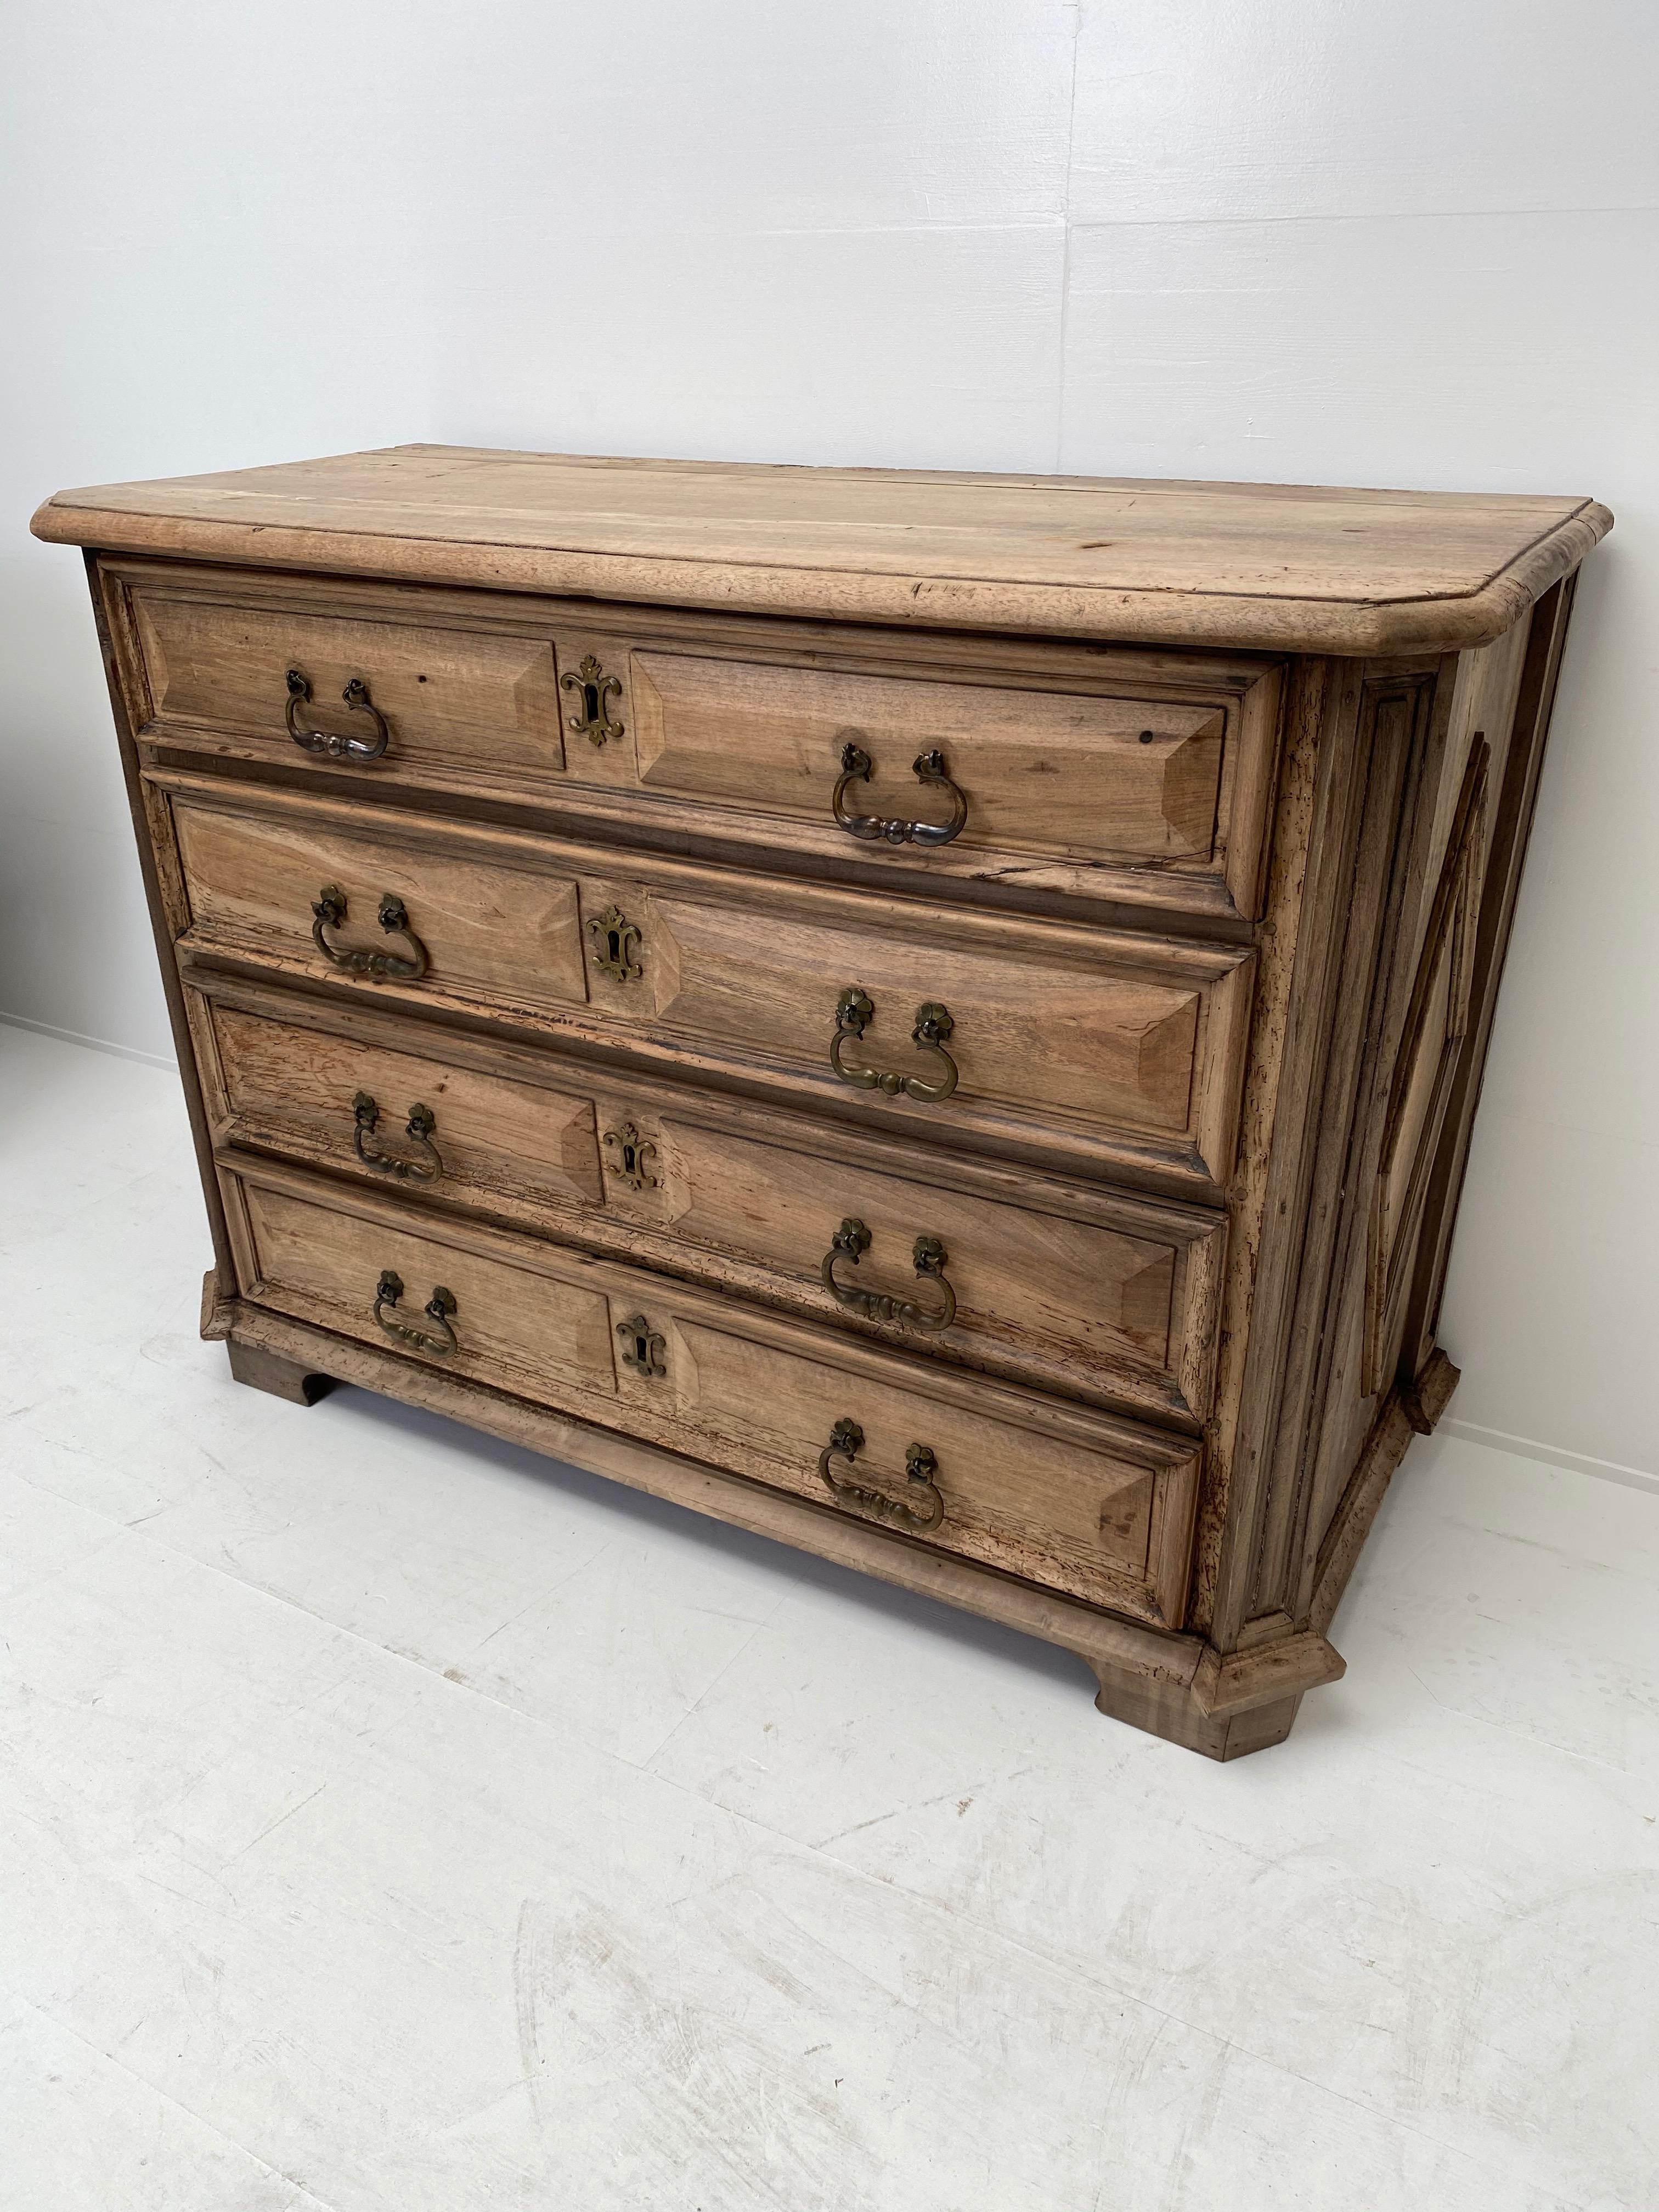 Beautiful Italian, Tuscan chest of drawers in bleached walnut, 18th century
4 drawers with original brass fittings and handles,
nice simple but strong pattern on the side and on the drawers,
powerful piece of furniture.